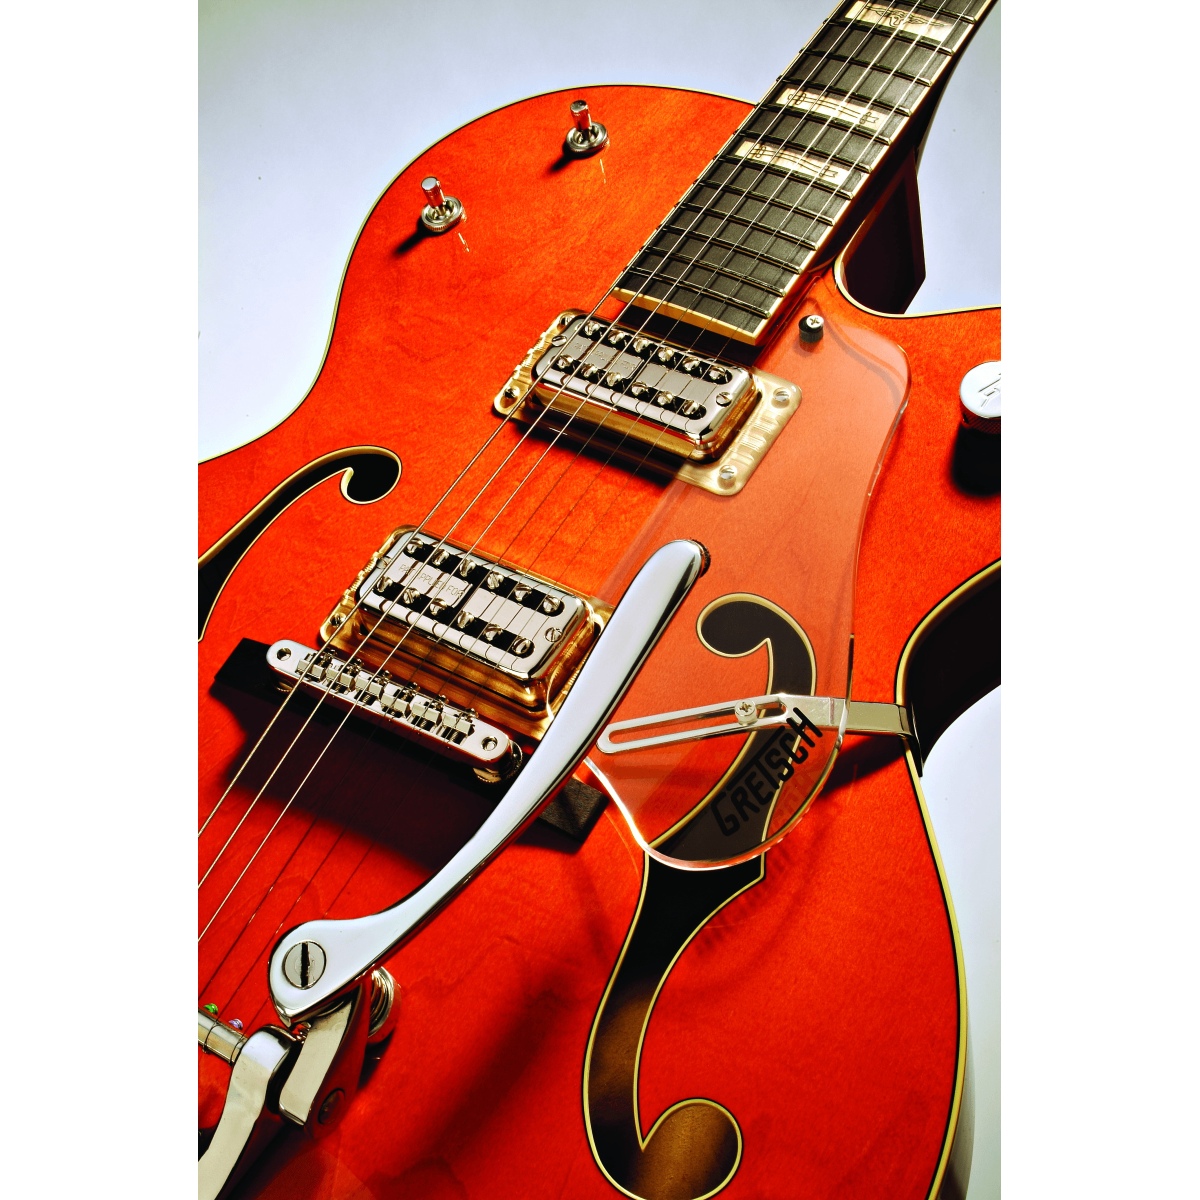 Gretsch / G6120RHH Reverend Horton Heat Signature Hollow Body with Bigsby  Ebony Fingerboard Orange Stain Lacquer グレッチ